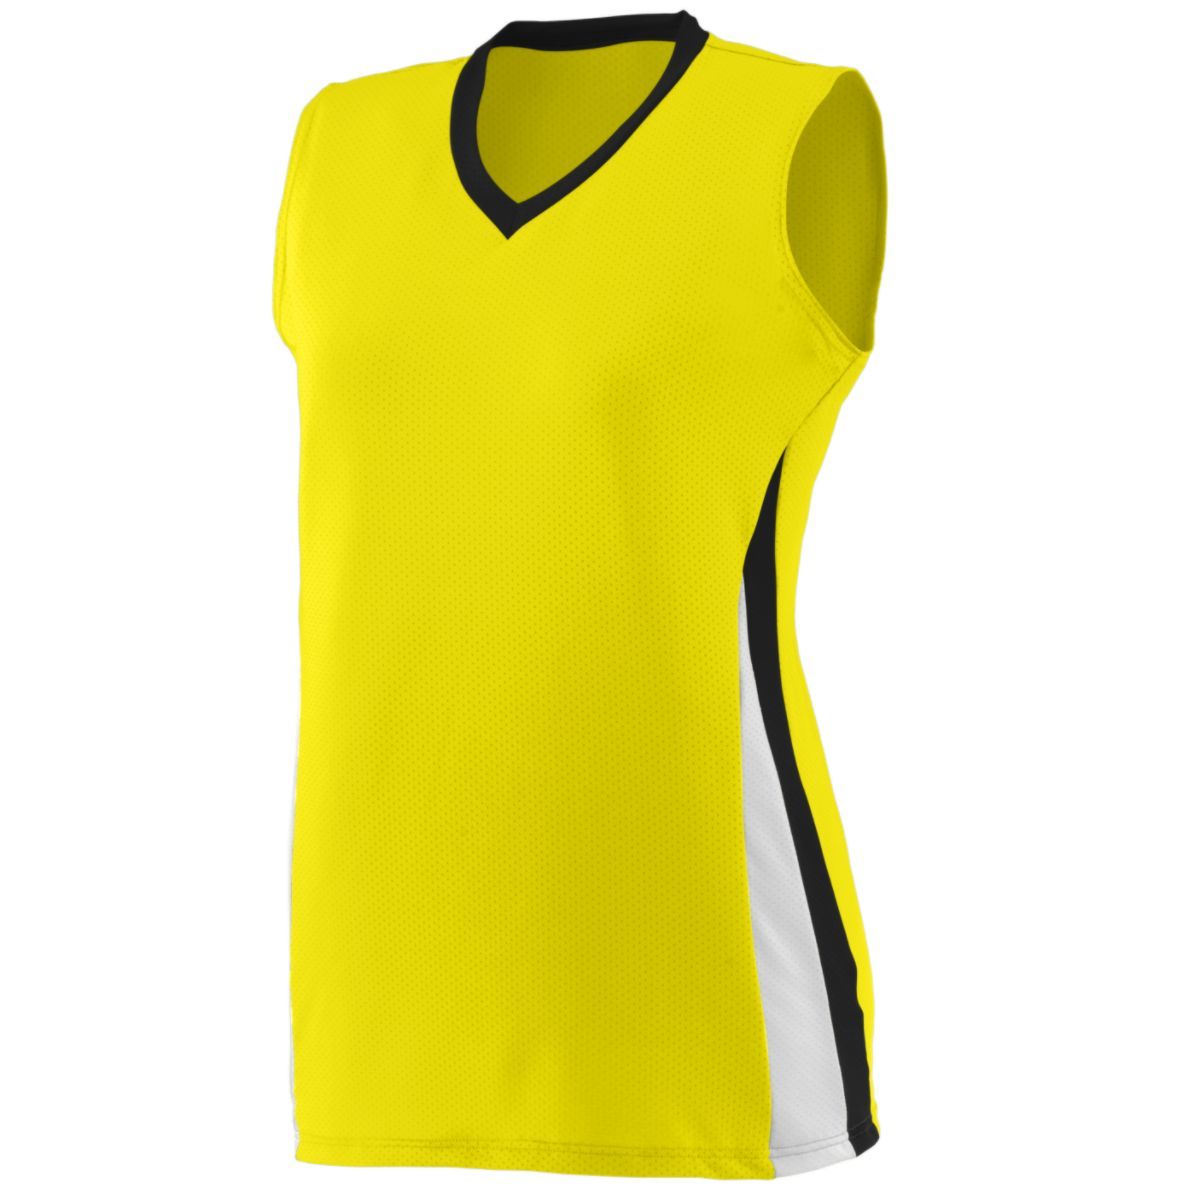 Augusta Sportswear Ladies Tornado Jersey in Power Yellow/Black/White  -Part of the Ladies, Ladies-Jersey, Augusta-Products, Volleyball, Shirts product lines at KanaleyCreations.com